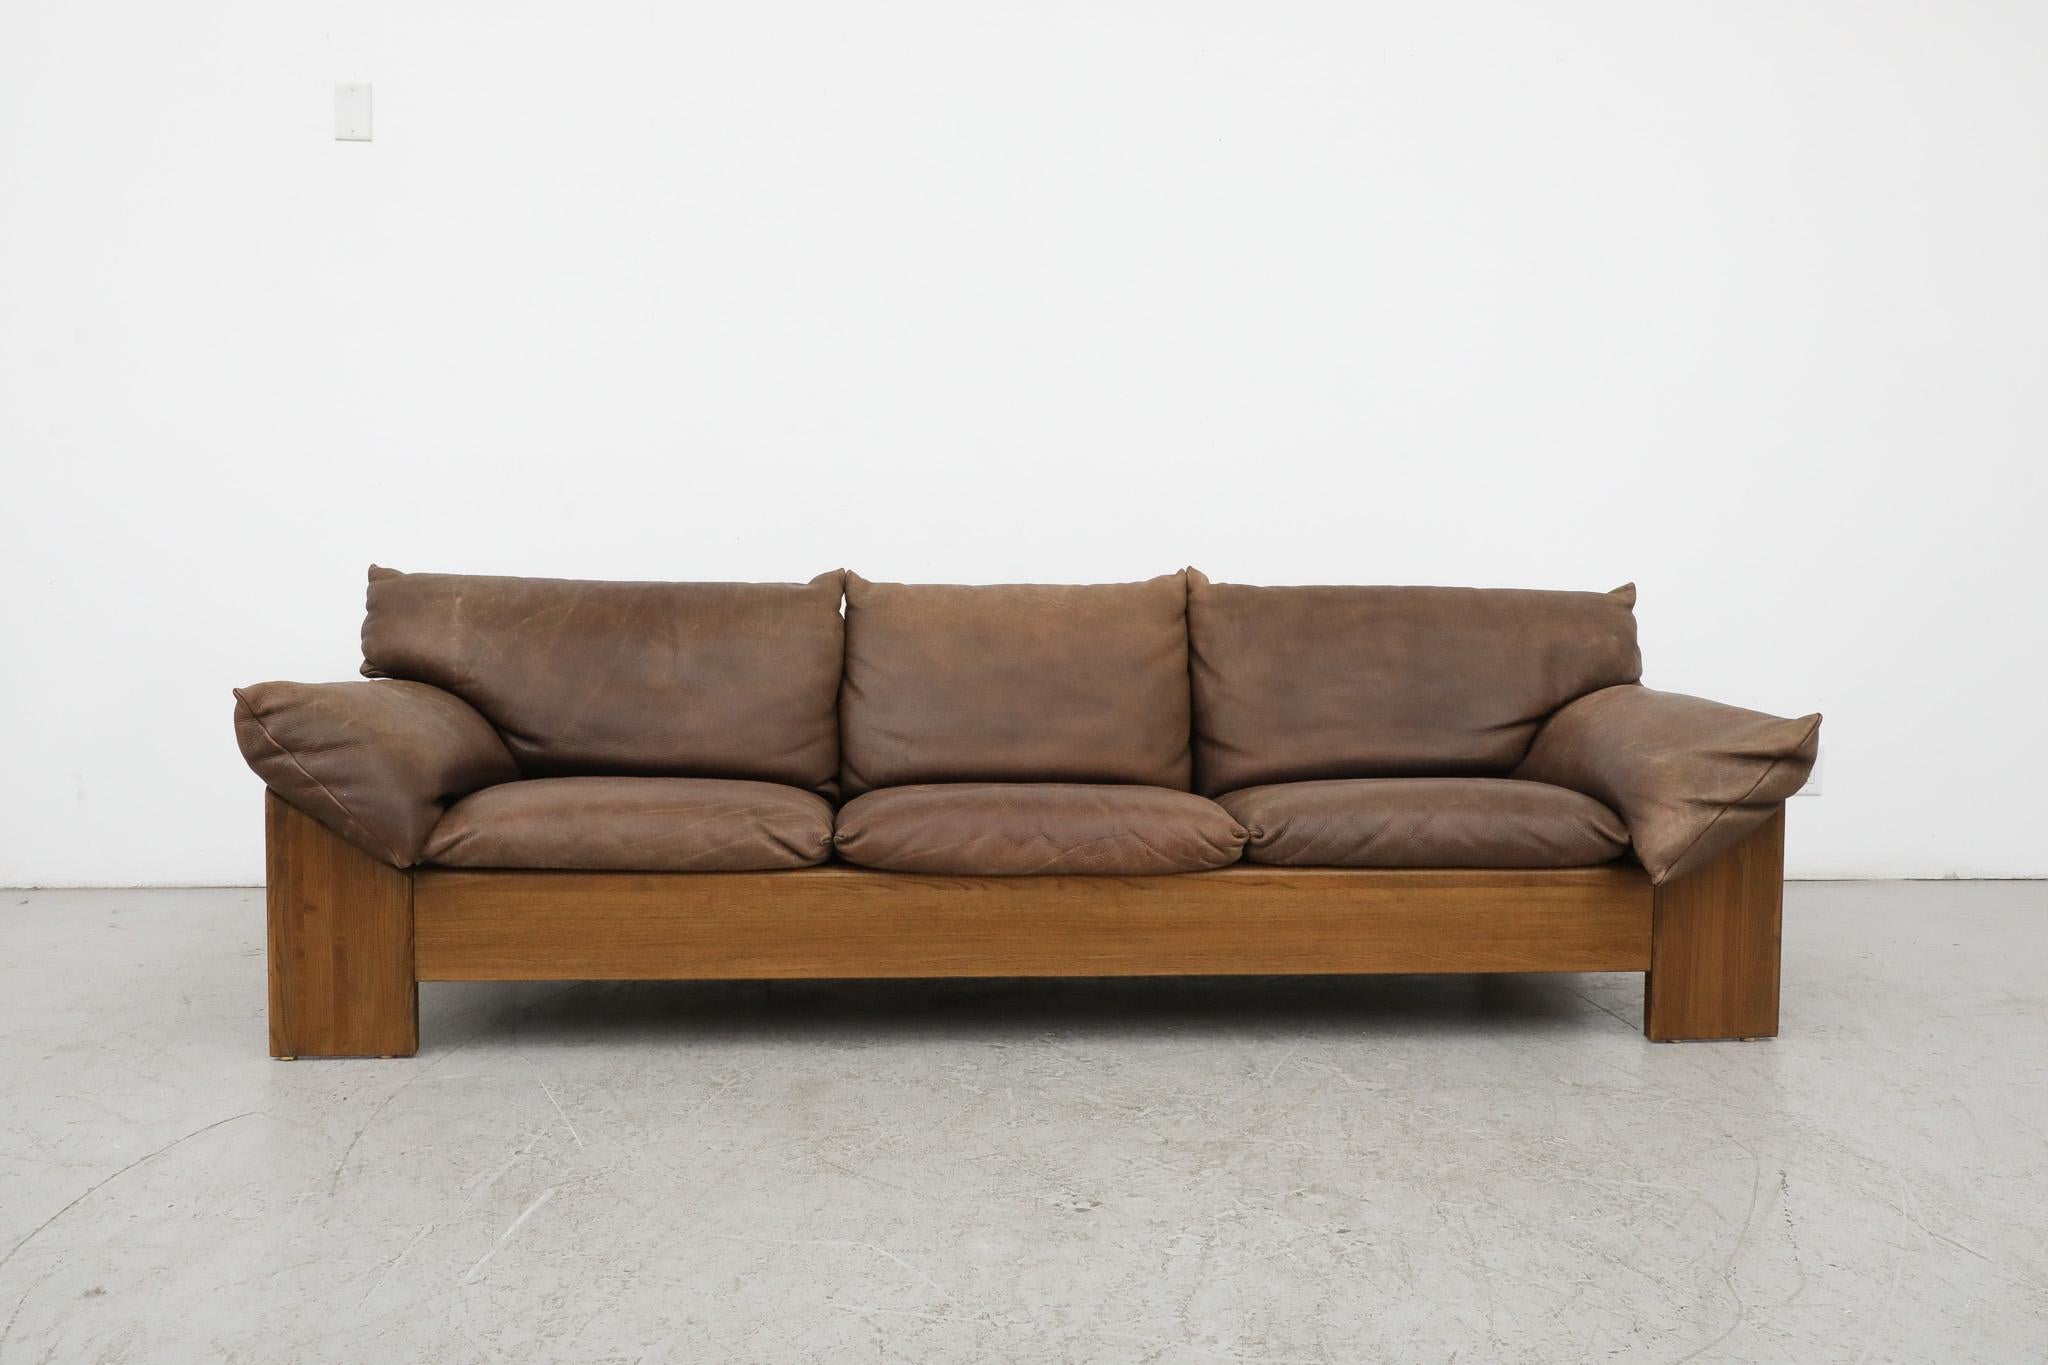 Handsome, Mid-Century 3 seater sofa with thick natural leather and lightly refinished oak frame. Expertly made by Dutch furniture manufacturer Leolux that has been producing all its furniture in Venlo, the Netherlands since 1934. In otherwise